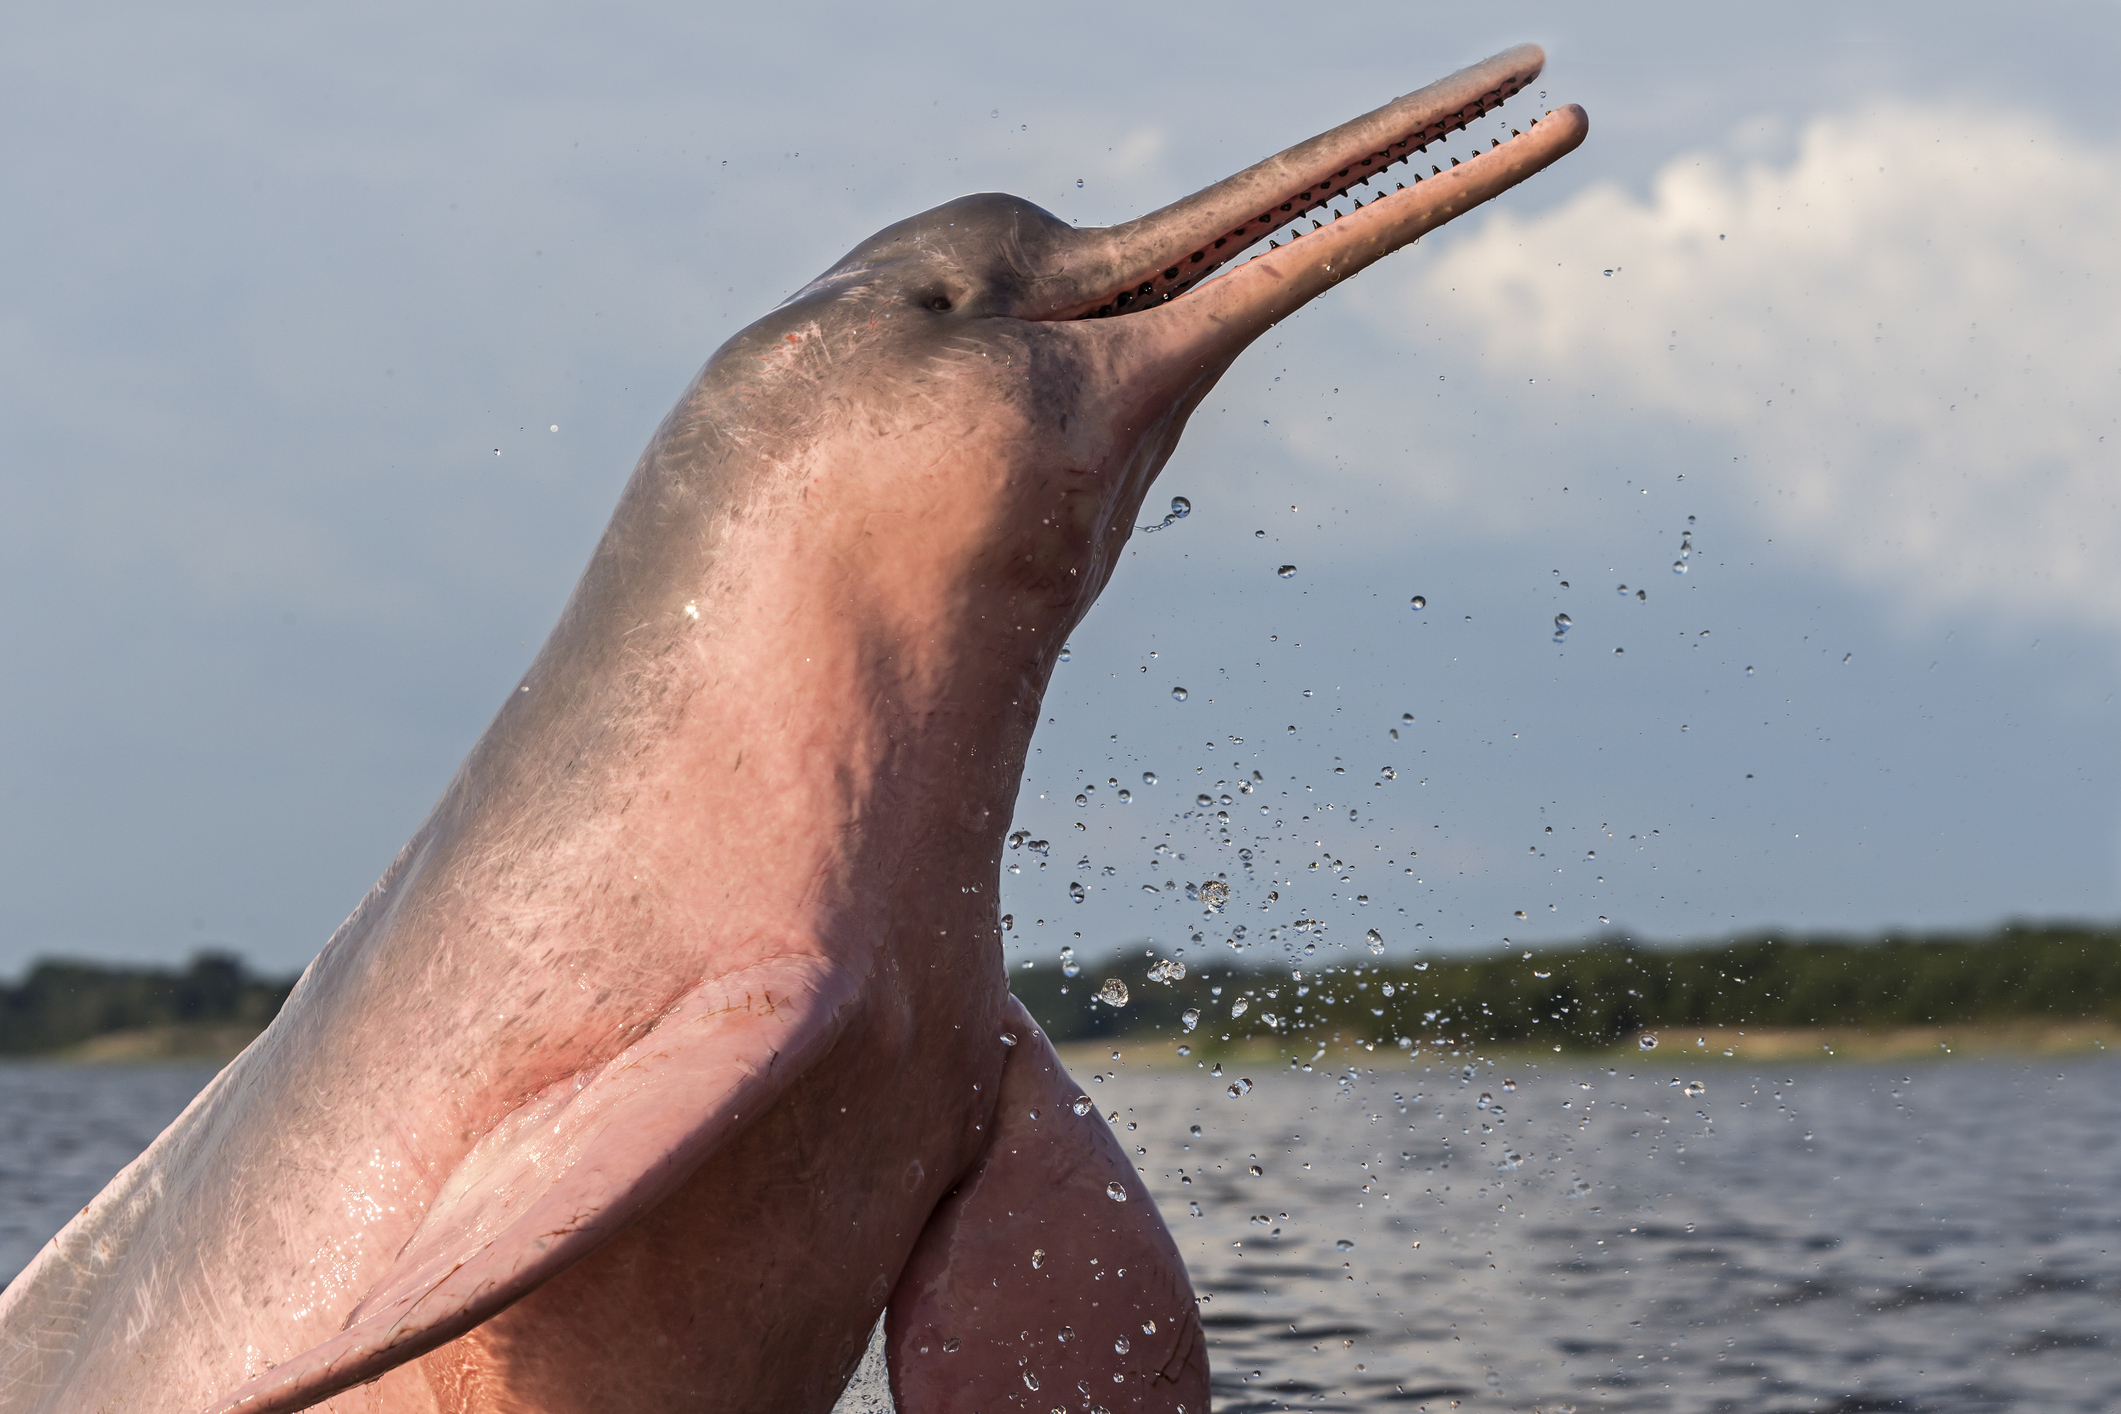 Amazon river dolphins are the largest and most widely recognized of several freshwater dolphin species